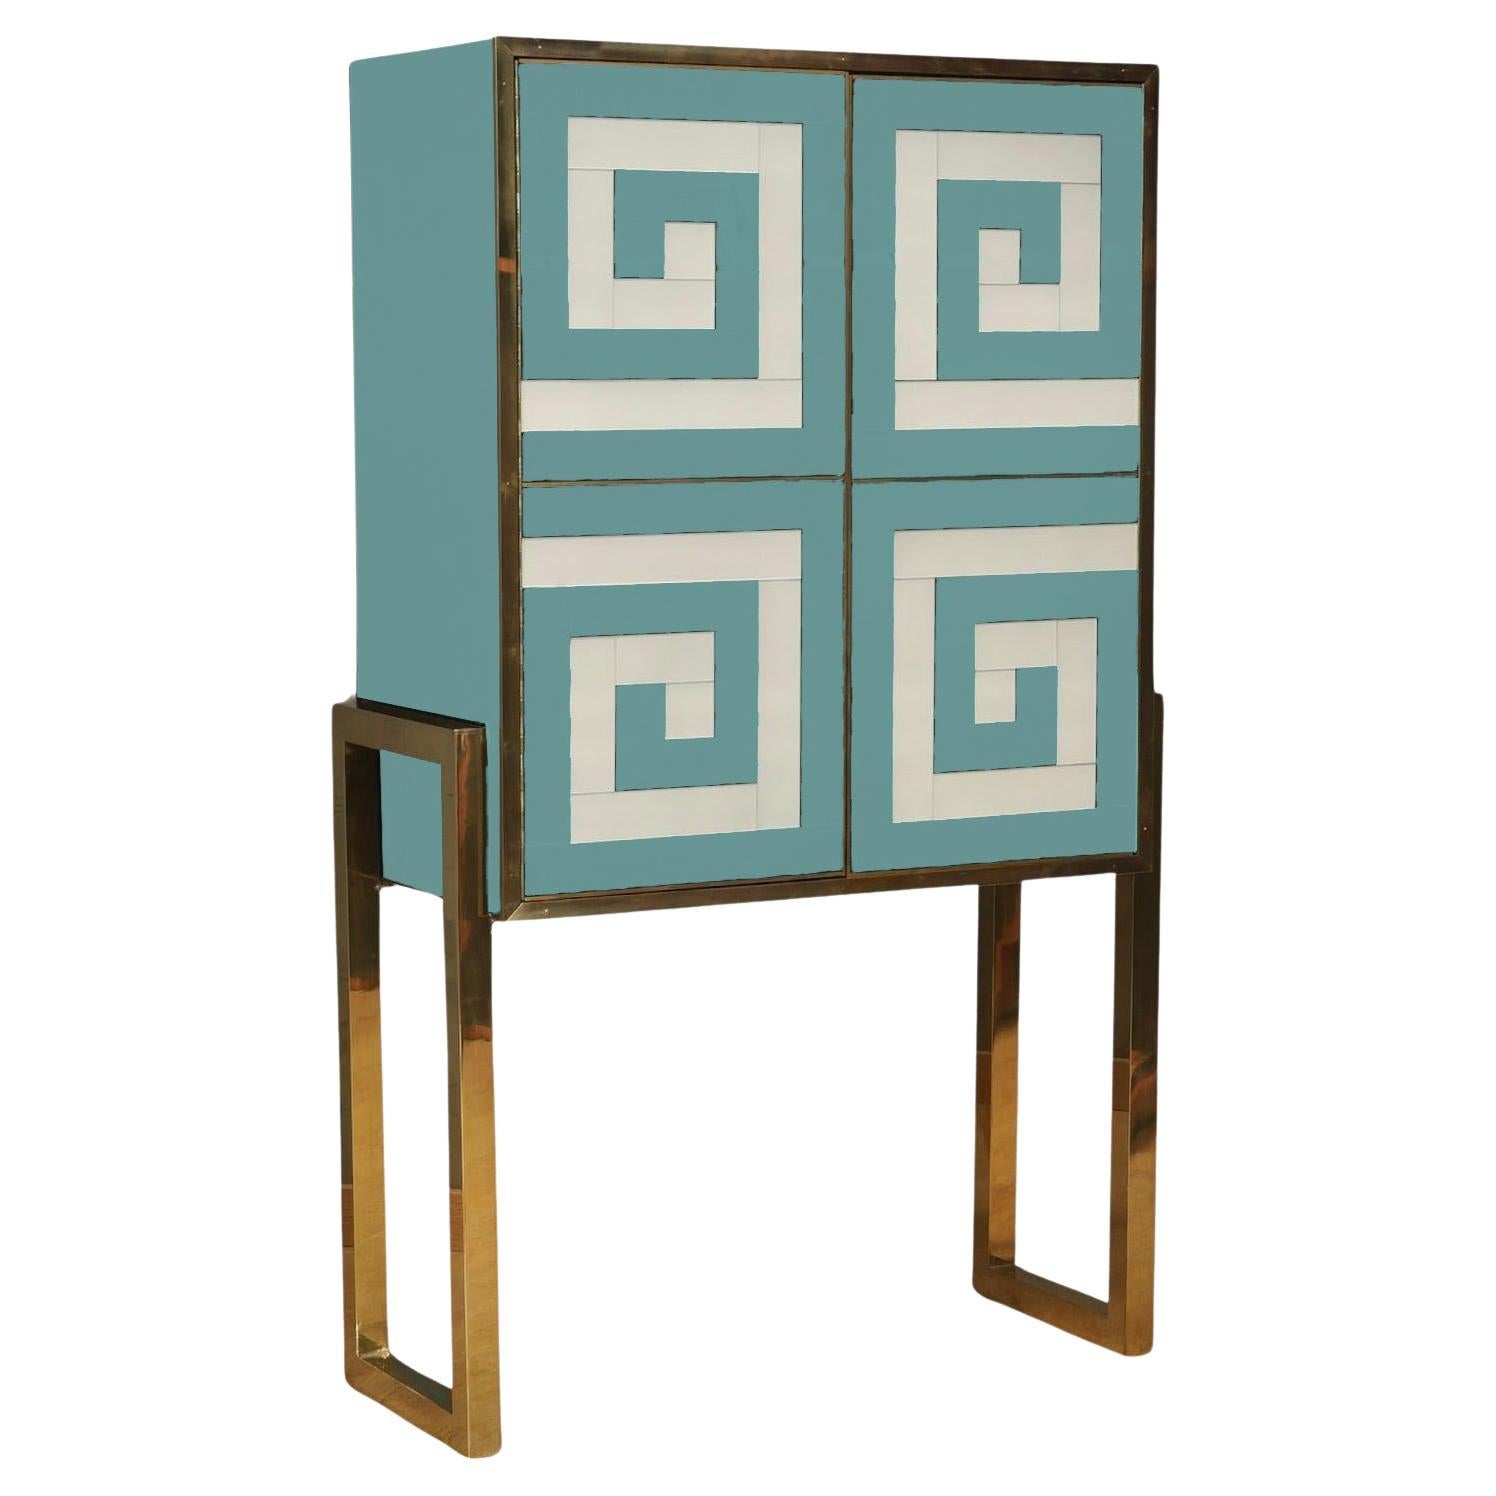 Spectacular Light Blue & White Bar Cabinet Made in Italy Available For Sale